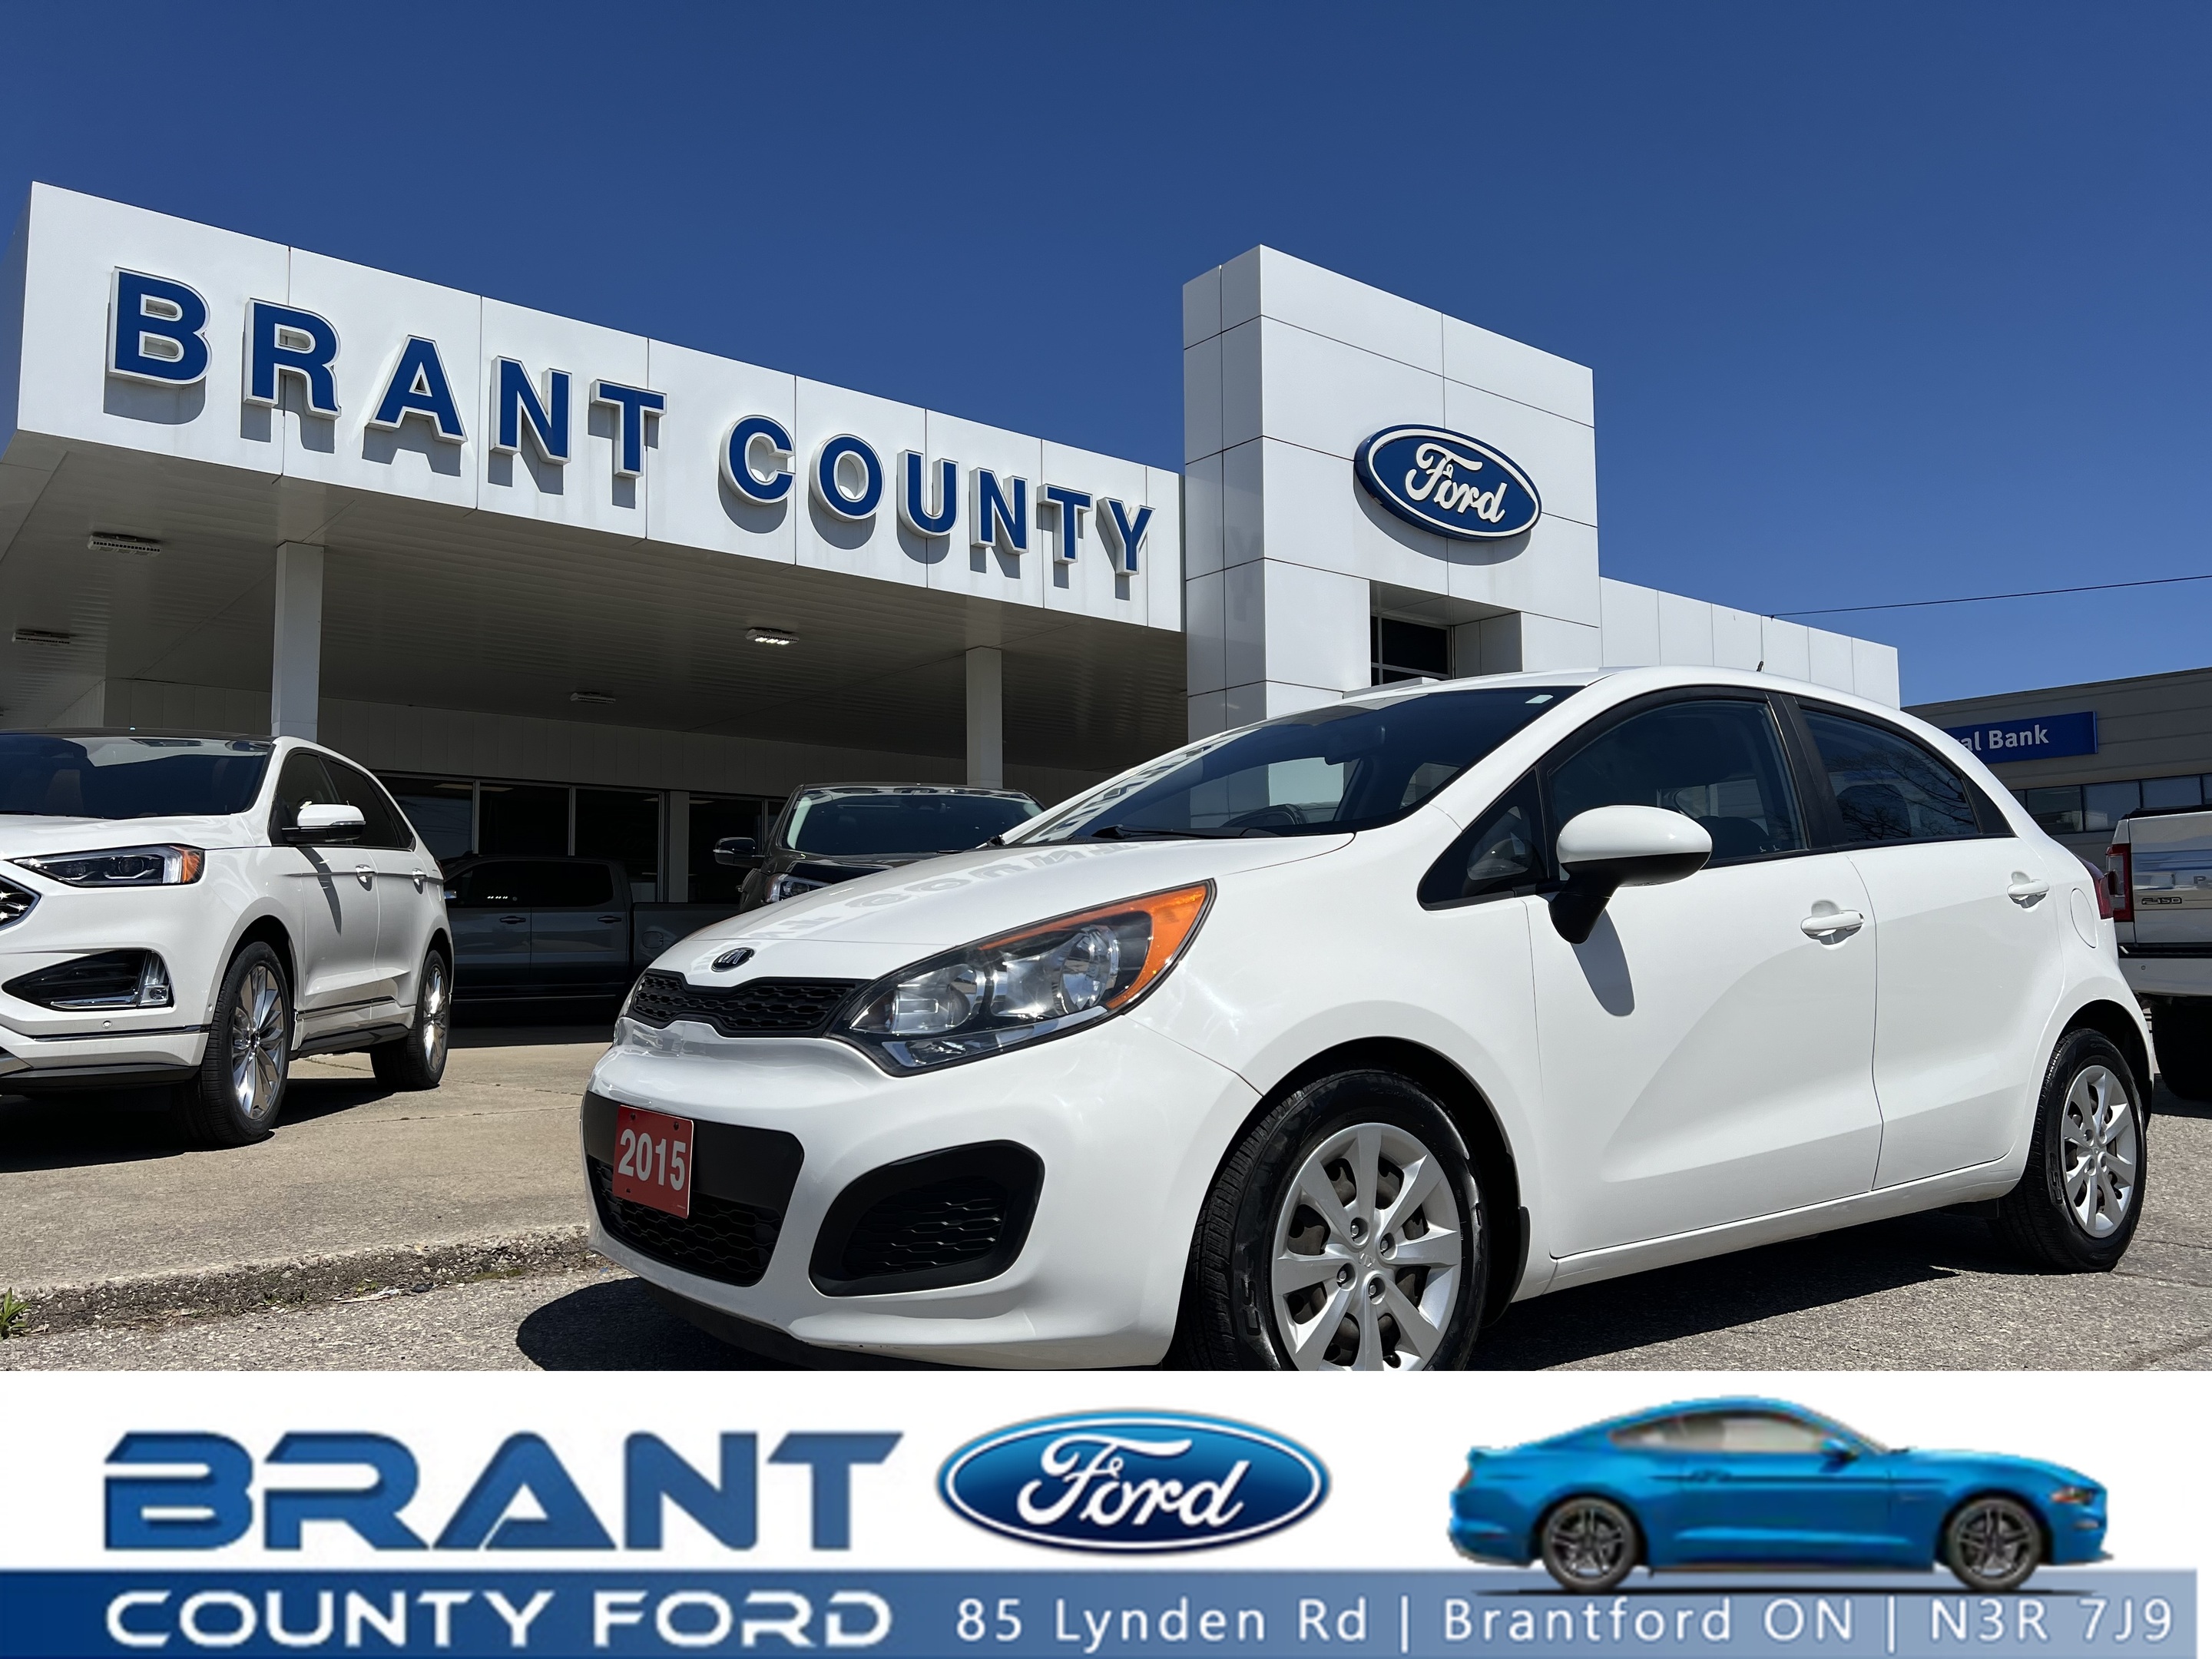 2015 Kia Rio Low KMS 5dr HB Auto LX+  Great first car